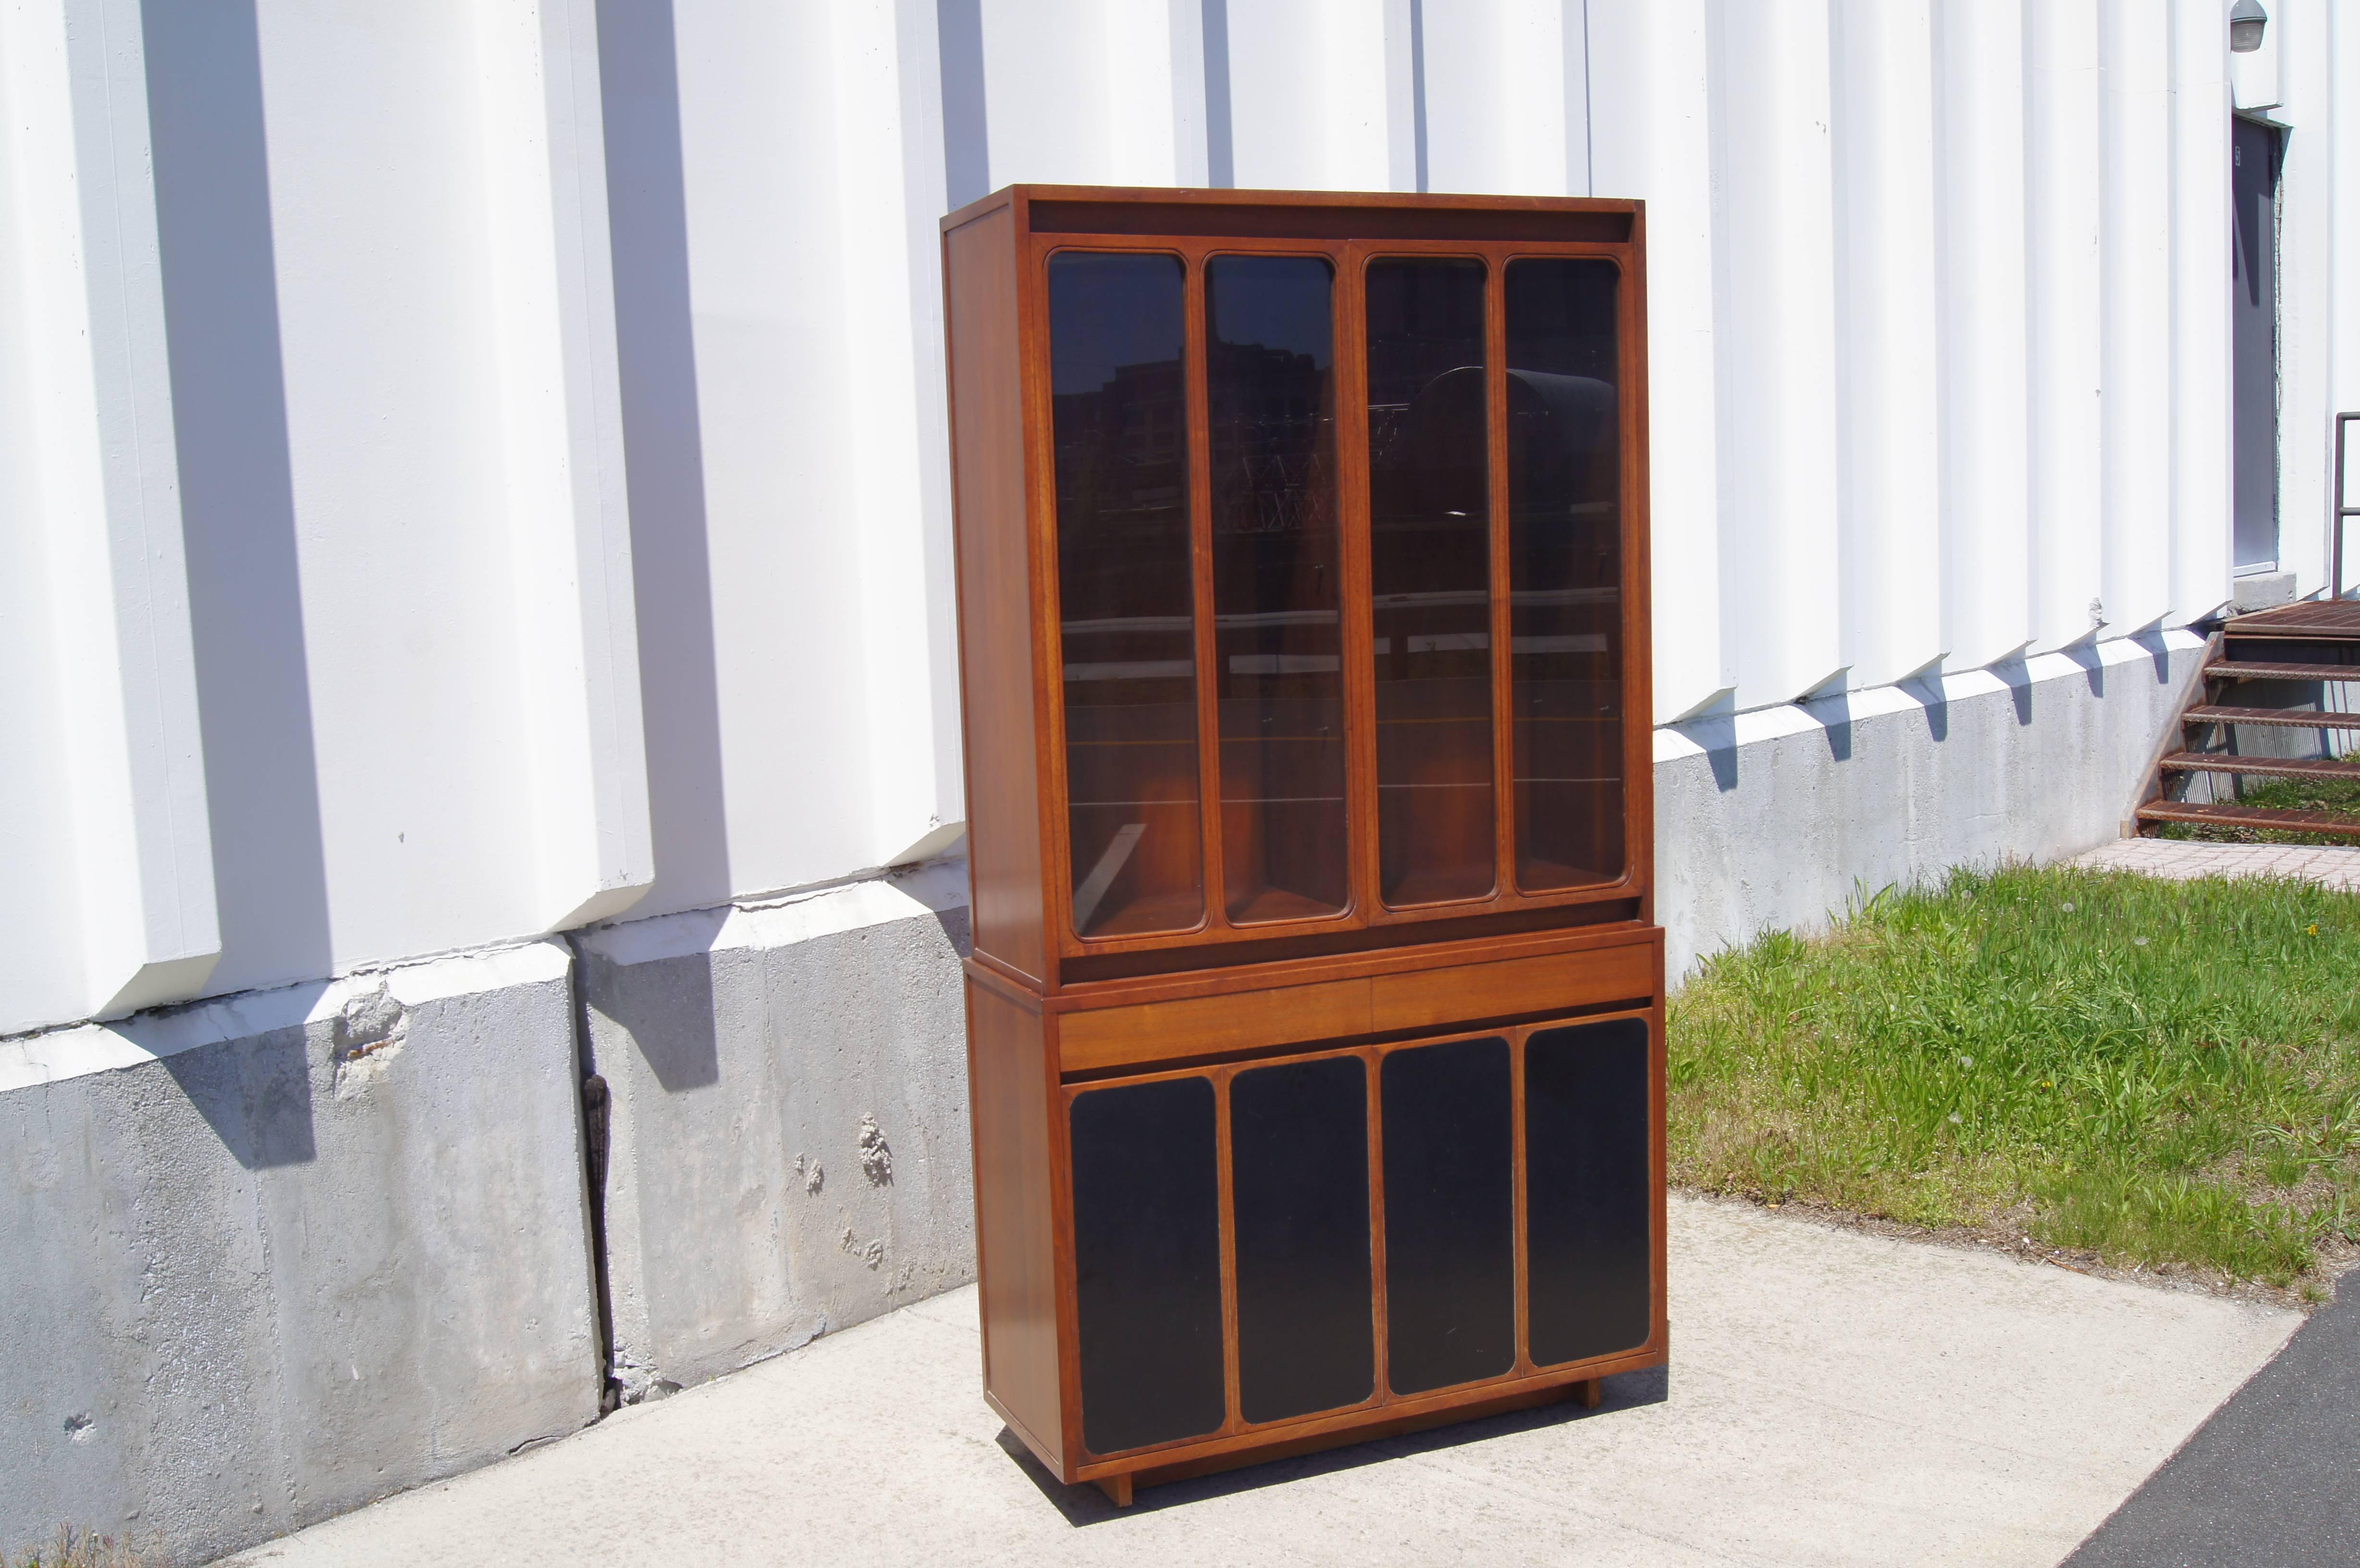 In this handsome Paul McCobb–designed cabinet, oiled walnut frames glass and leather-fronted cases. The upper display case has six adjustable glass shelves; the lower case features two wide drawers above generous storage, with two adjustable shelves